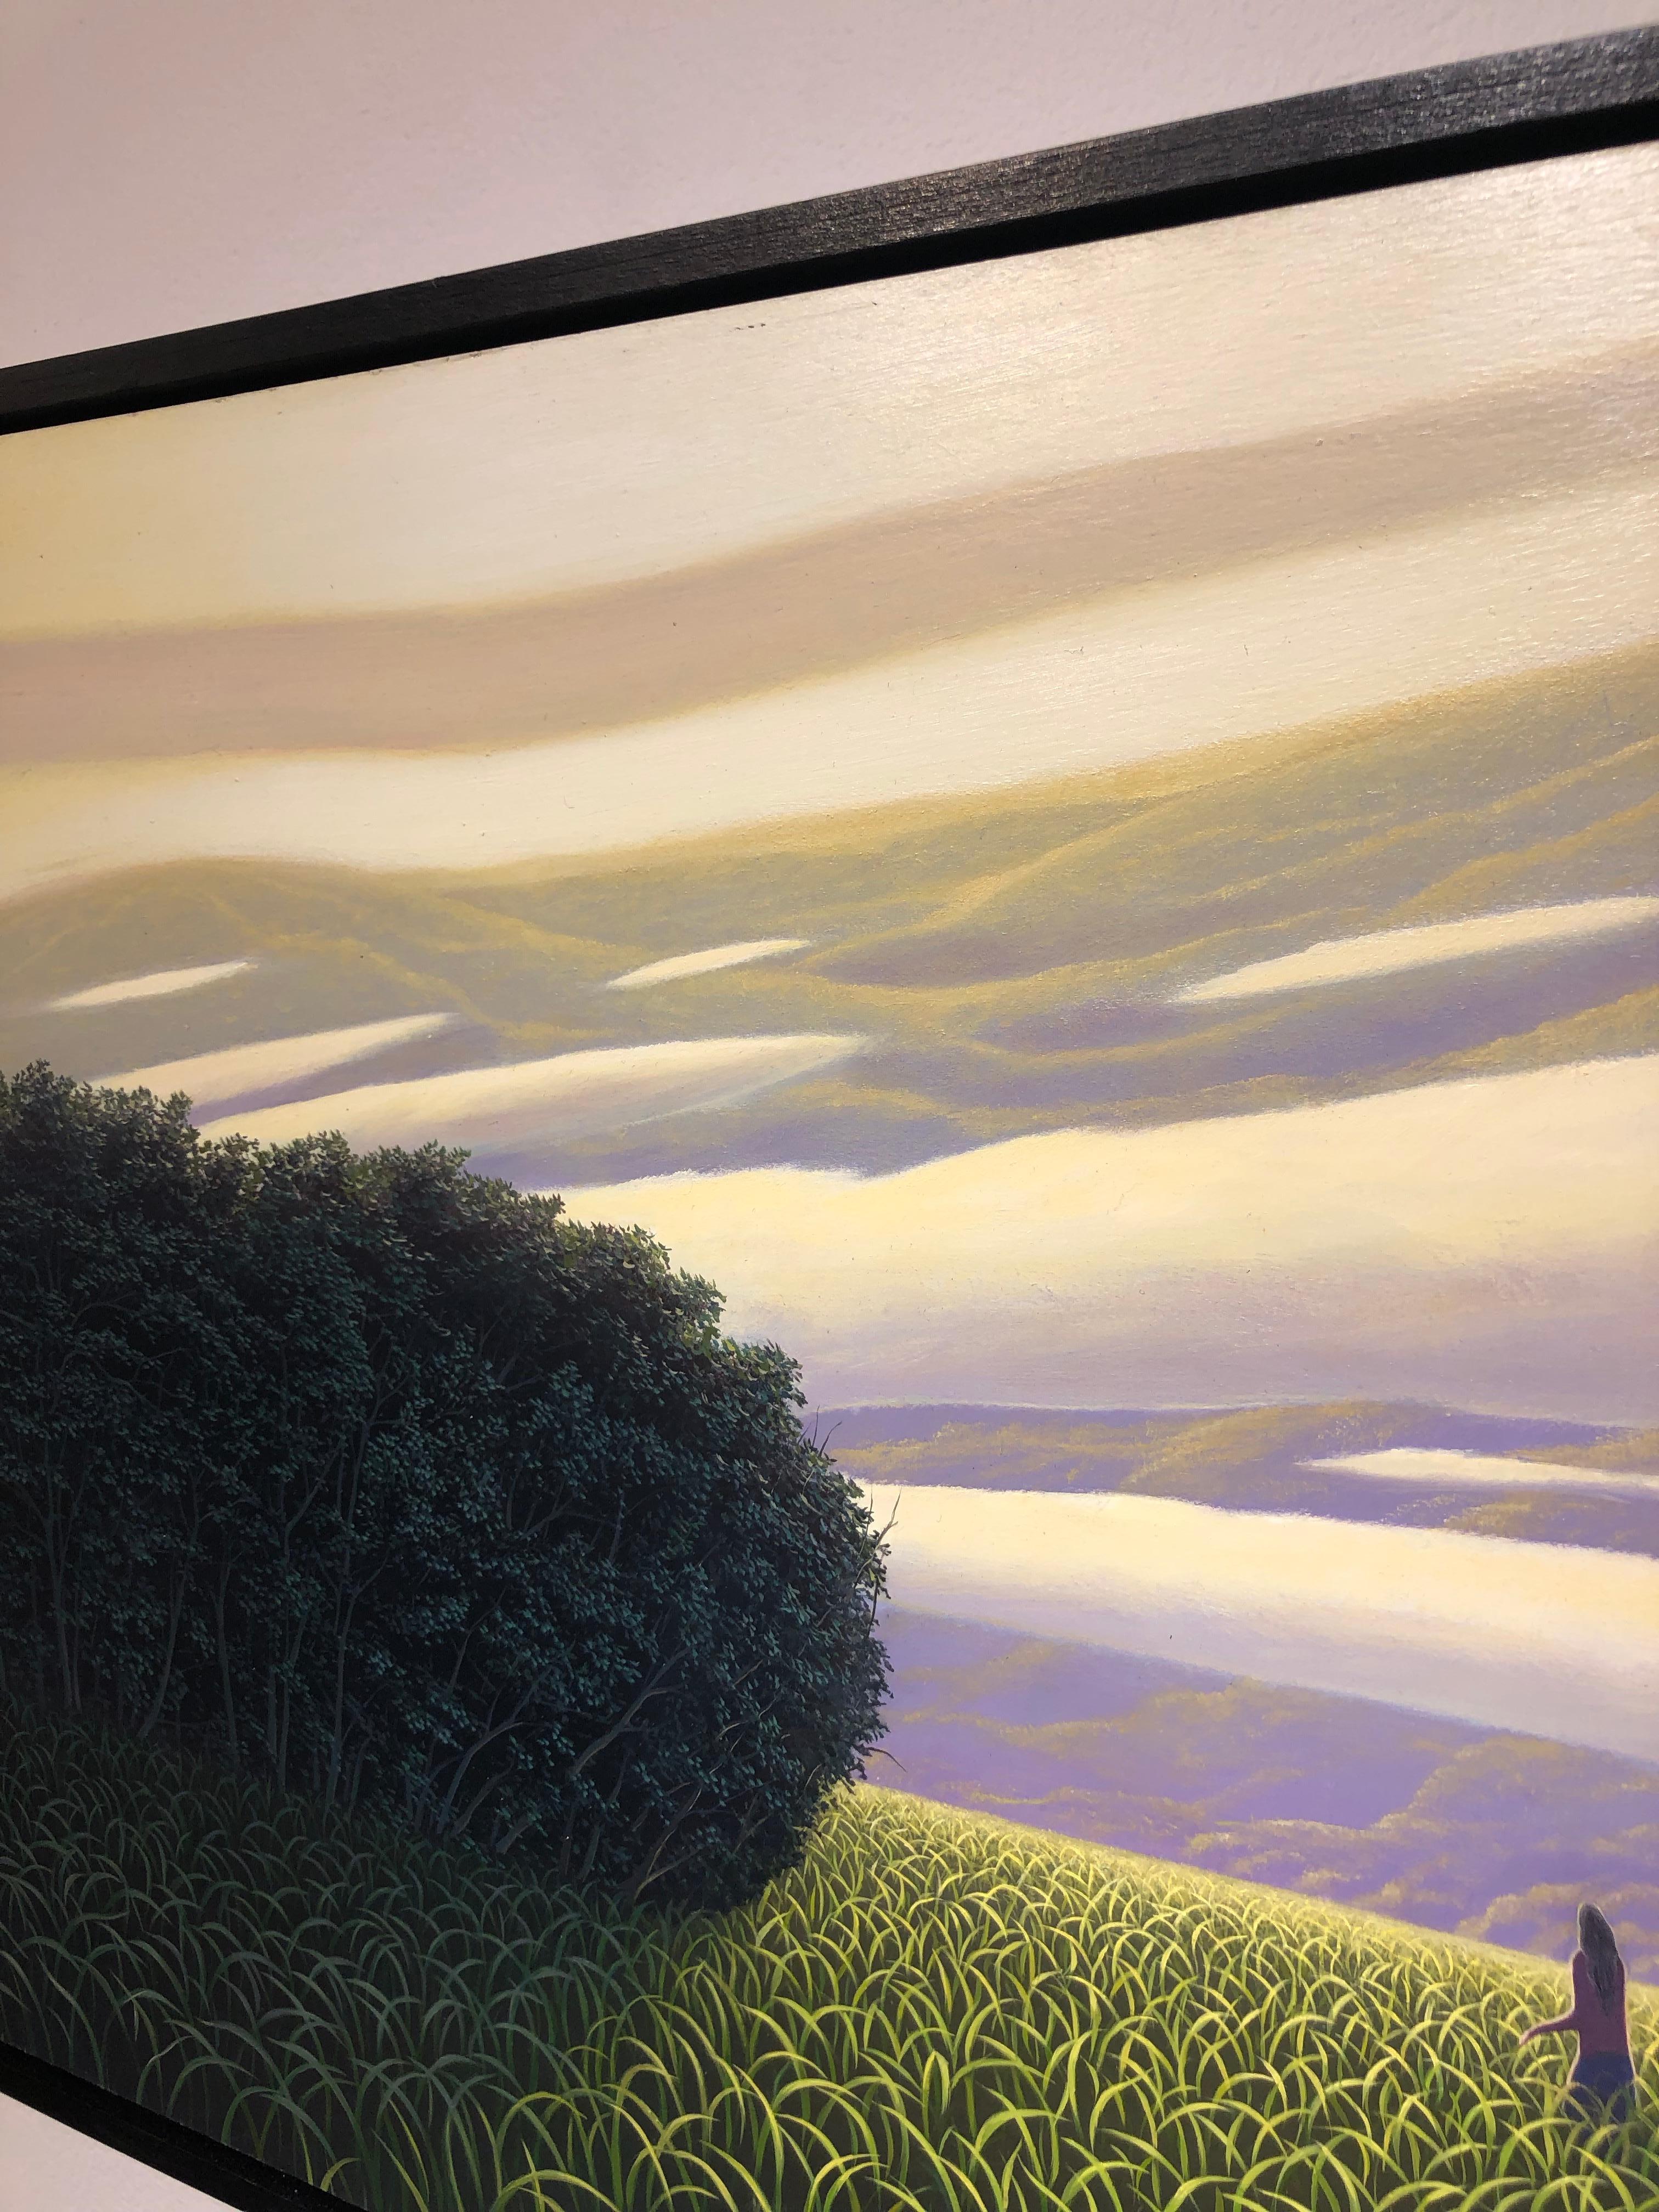 The Perfect Evening - Original Oil Painting of Figure in a Surreal Landscape 3